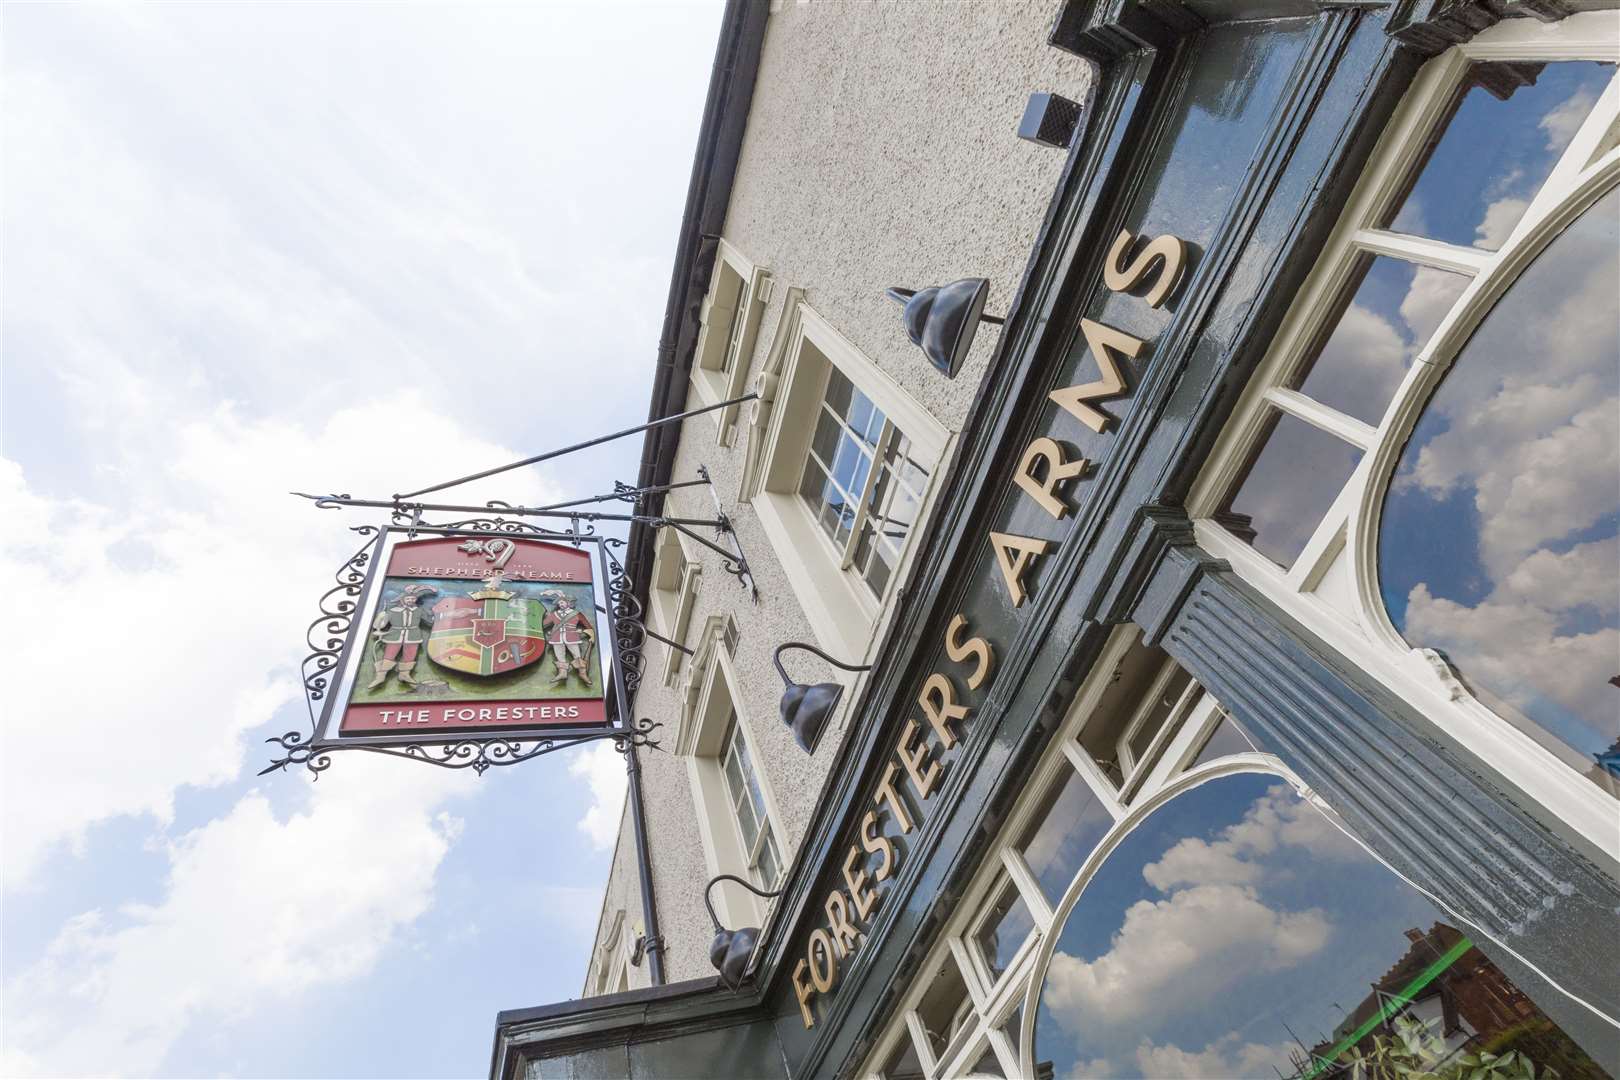 The pub is just a short walk from both the bus and train station at Tonbridge